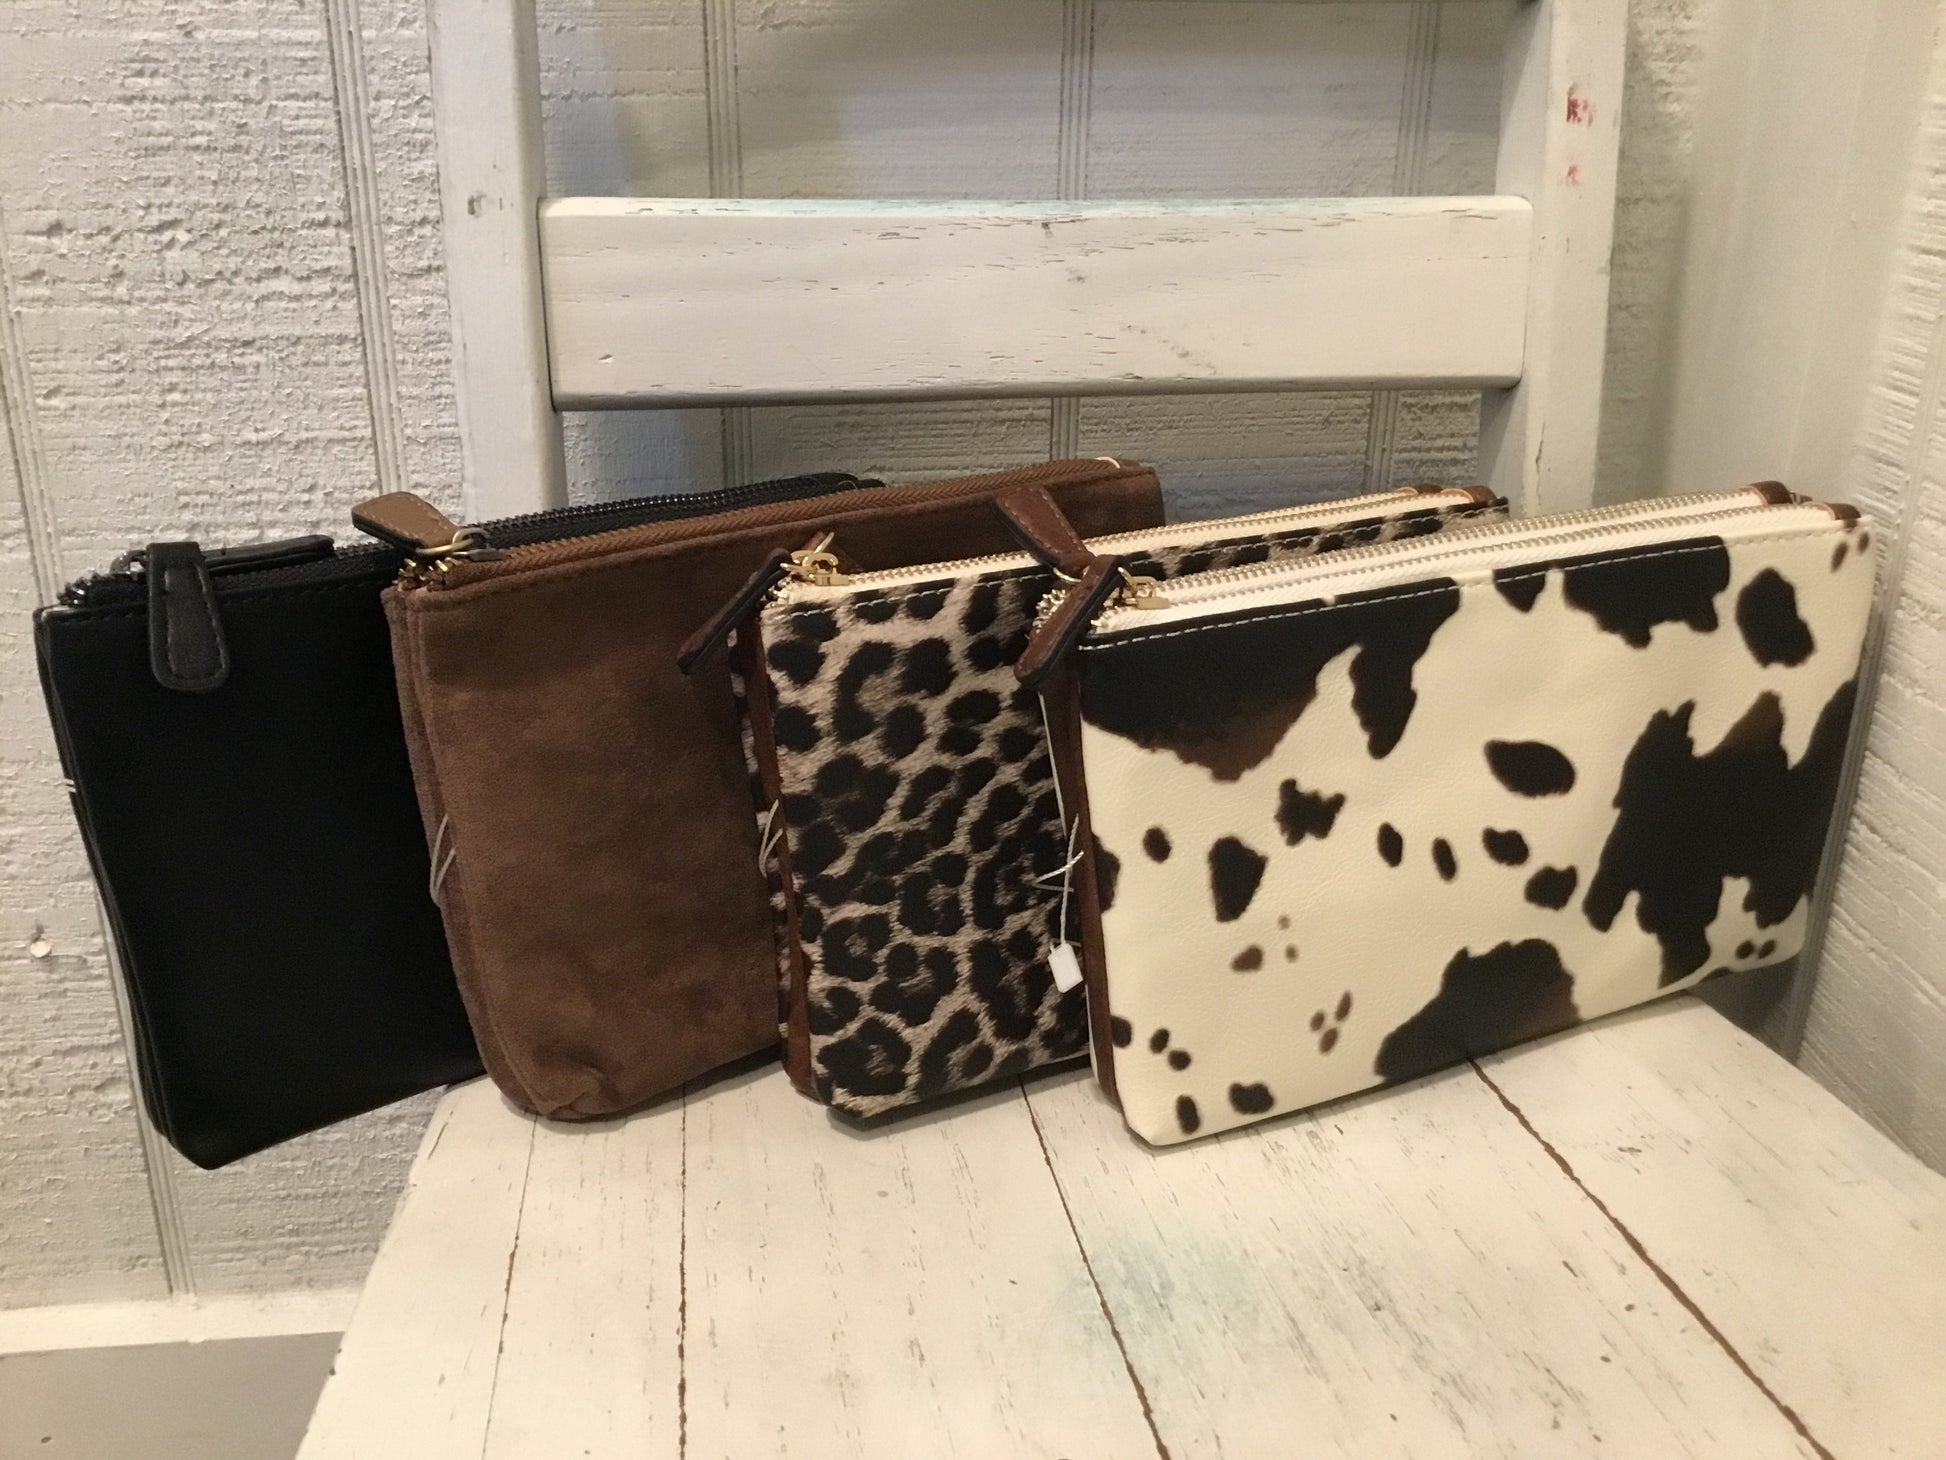 CROSSBODY PURSES AND GUITAR STRAPS – The Hippie Fish